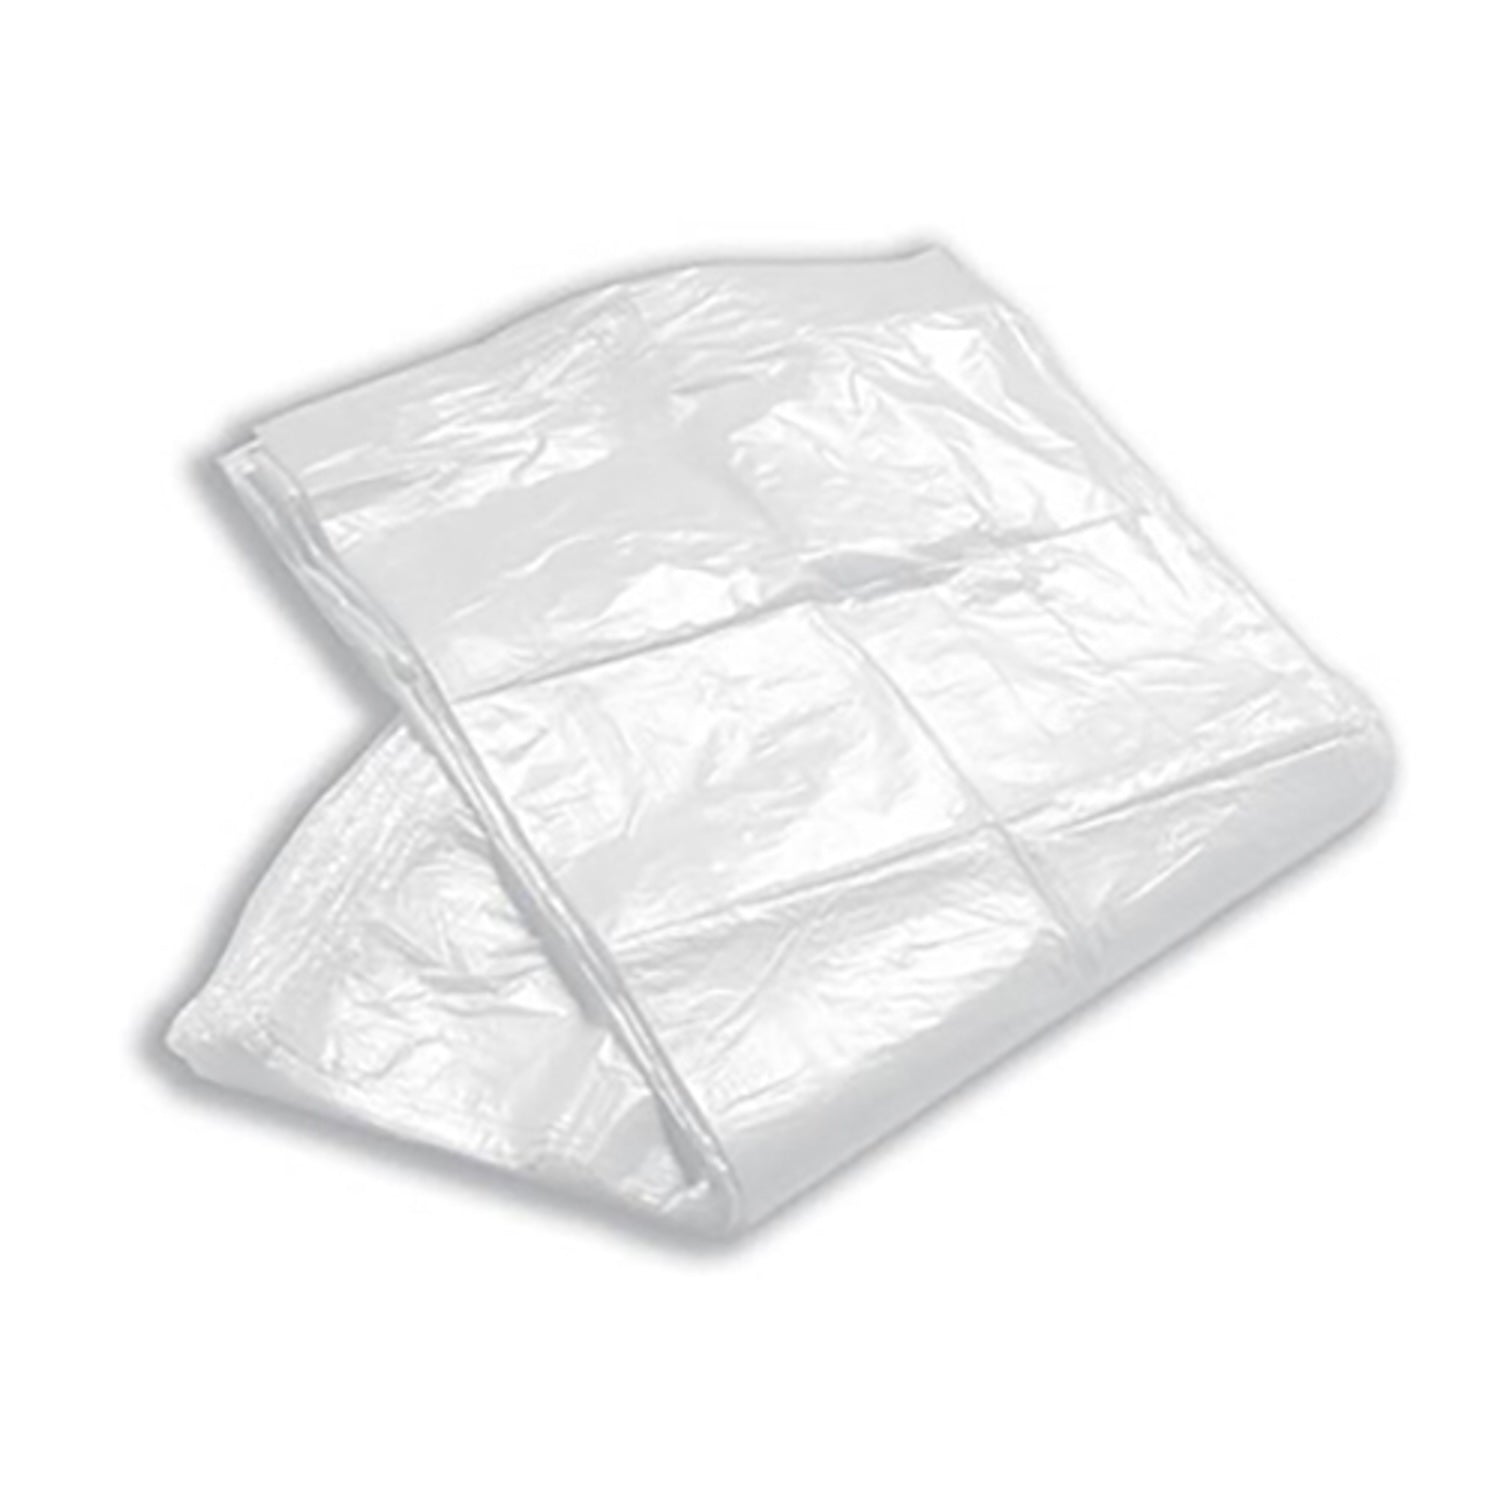 Bin Liners | Medium Duty with White Square | Pack of 100